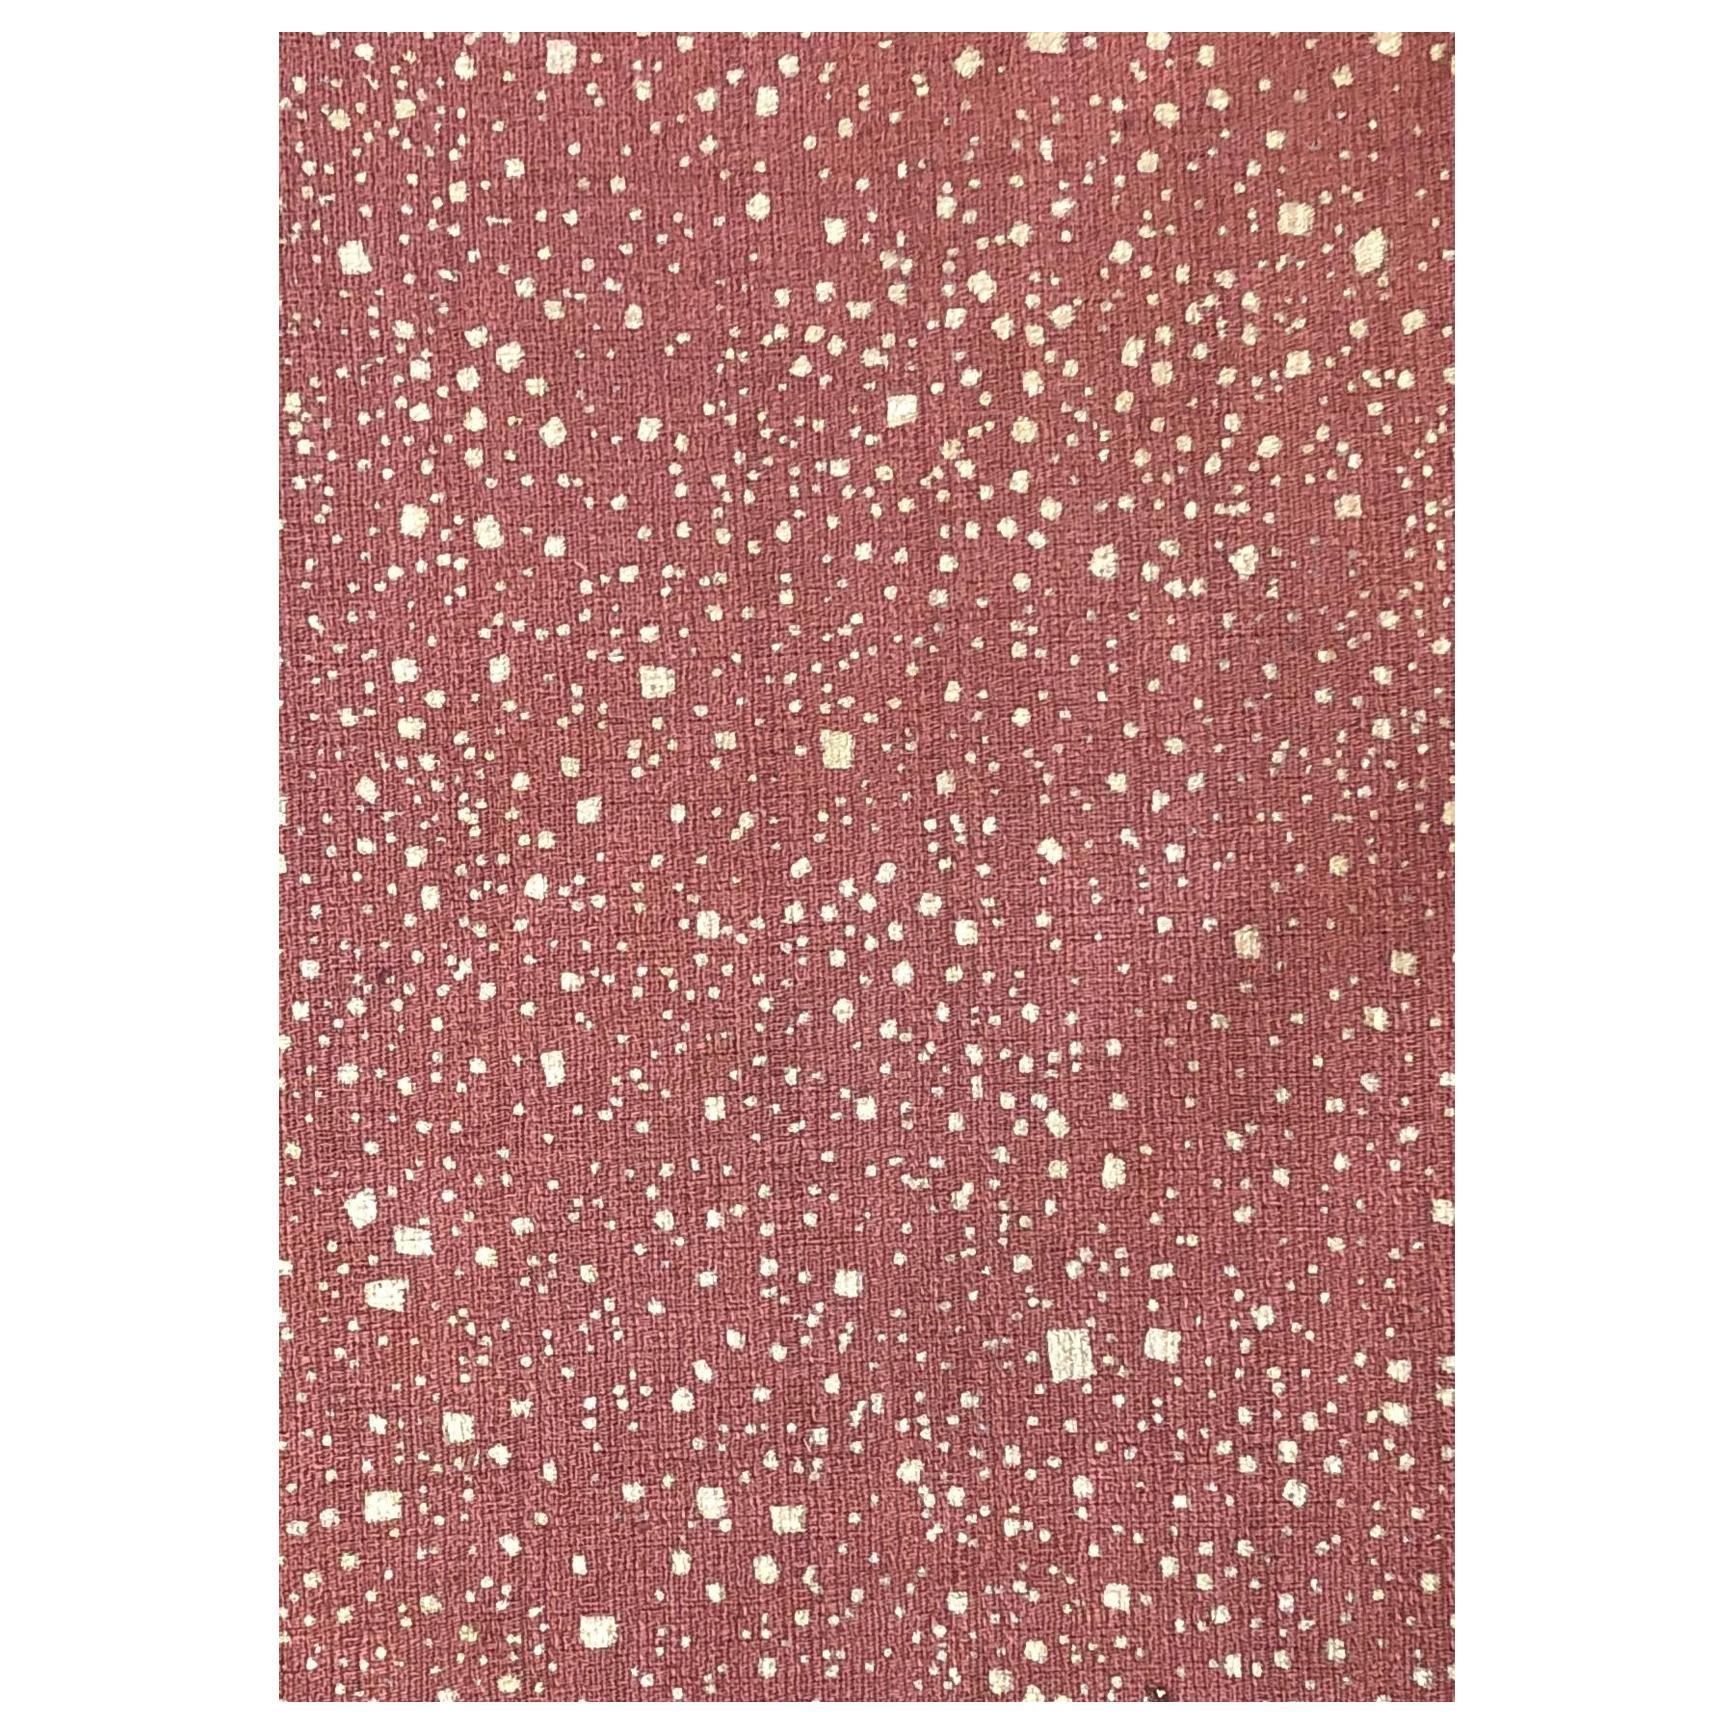 Vintage Mid-Century Rust Colored Barkcloth with Gold Speckles